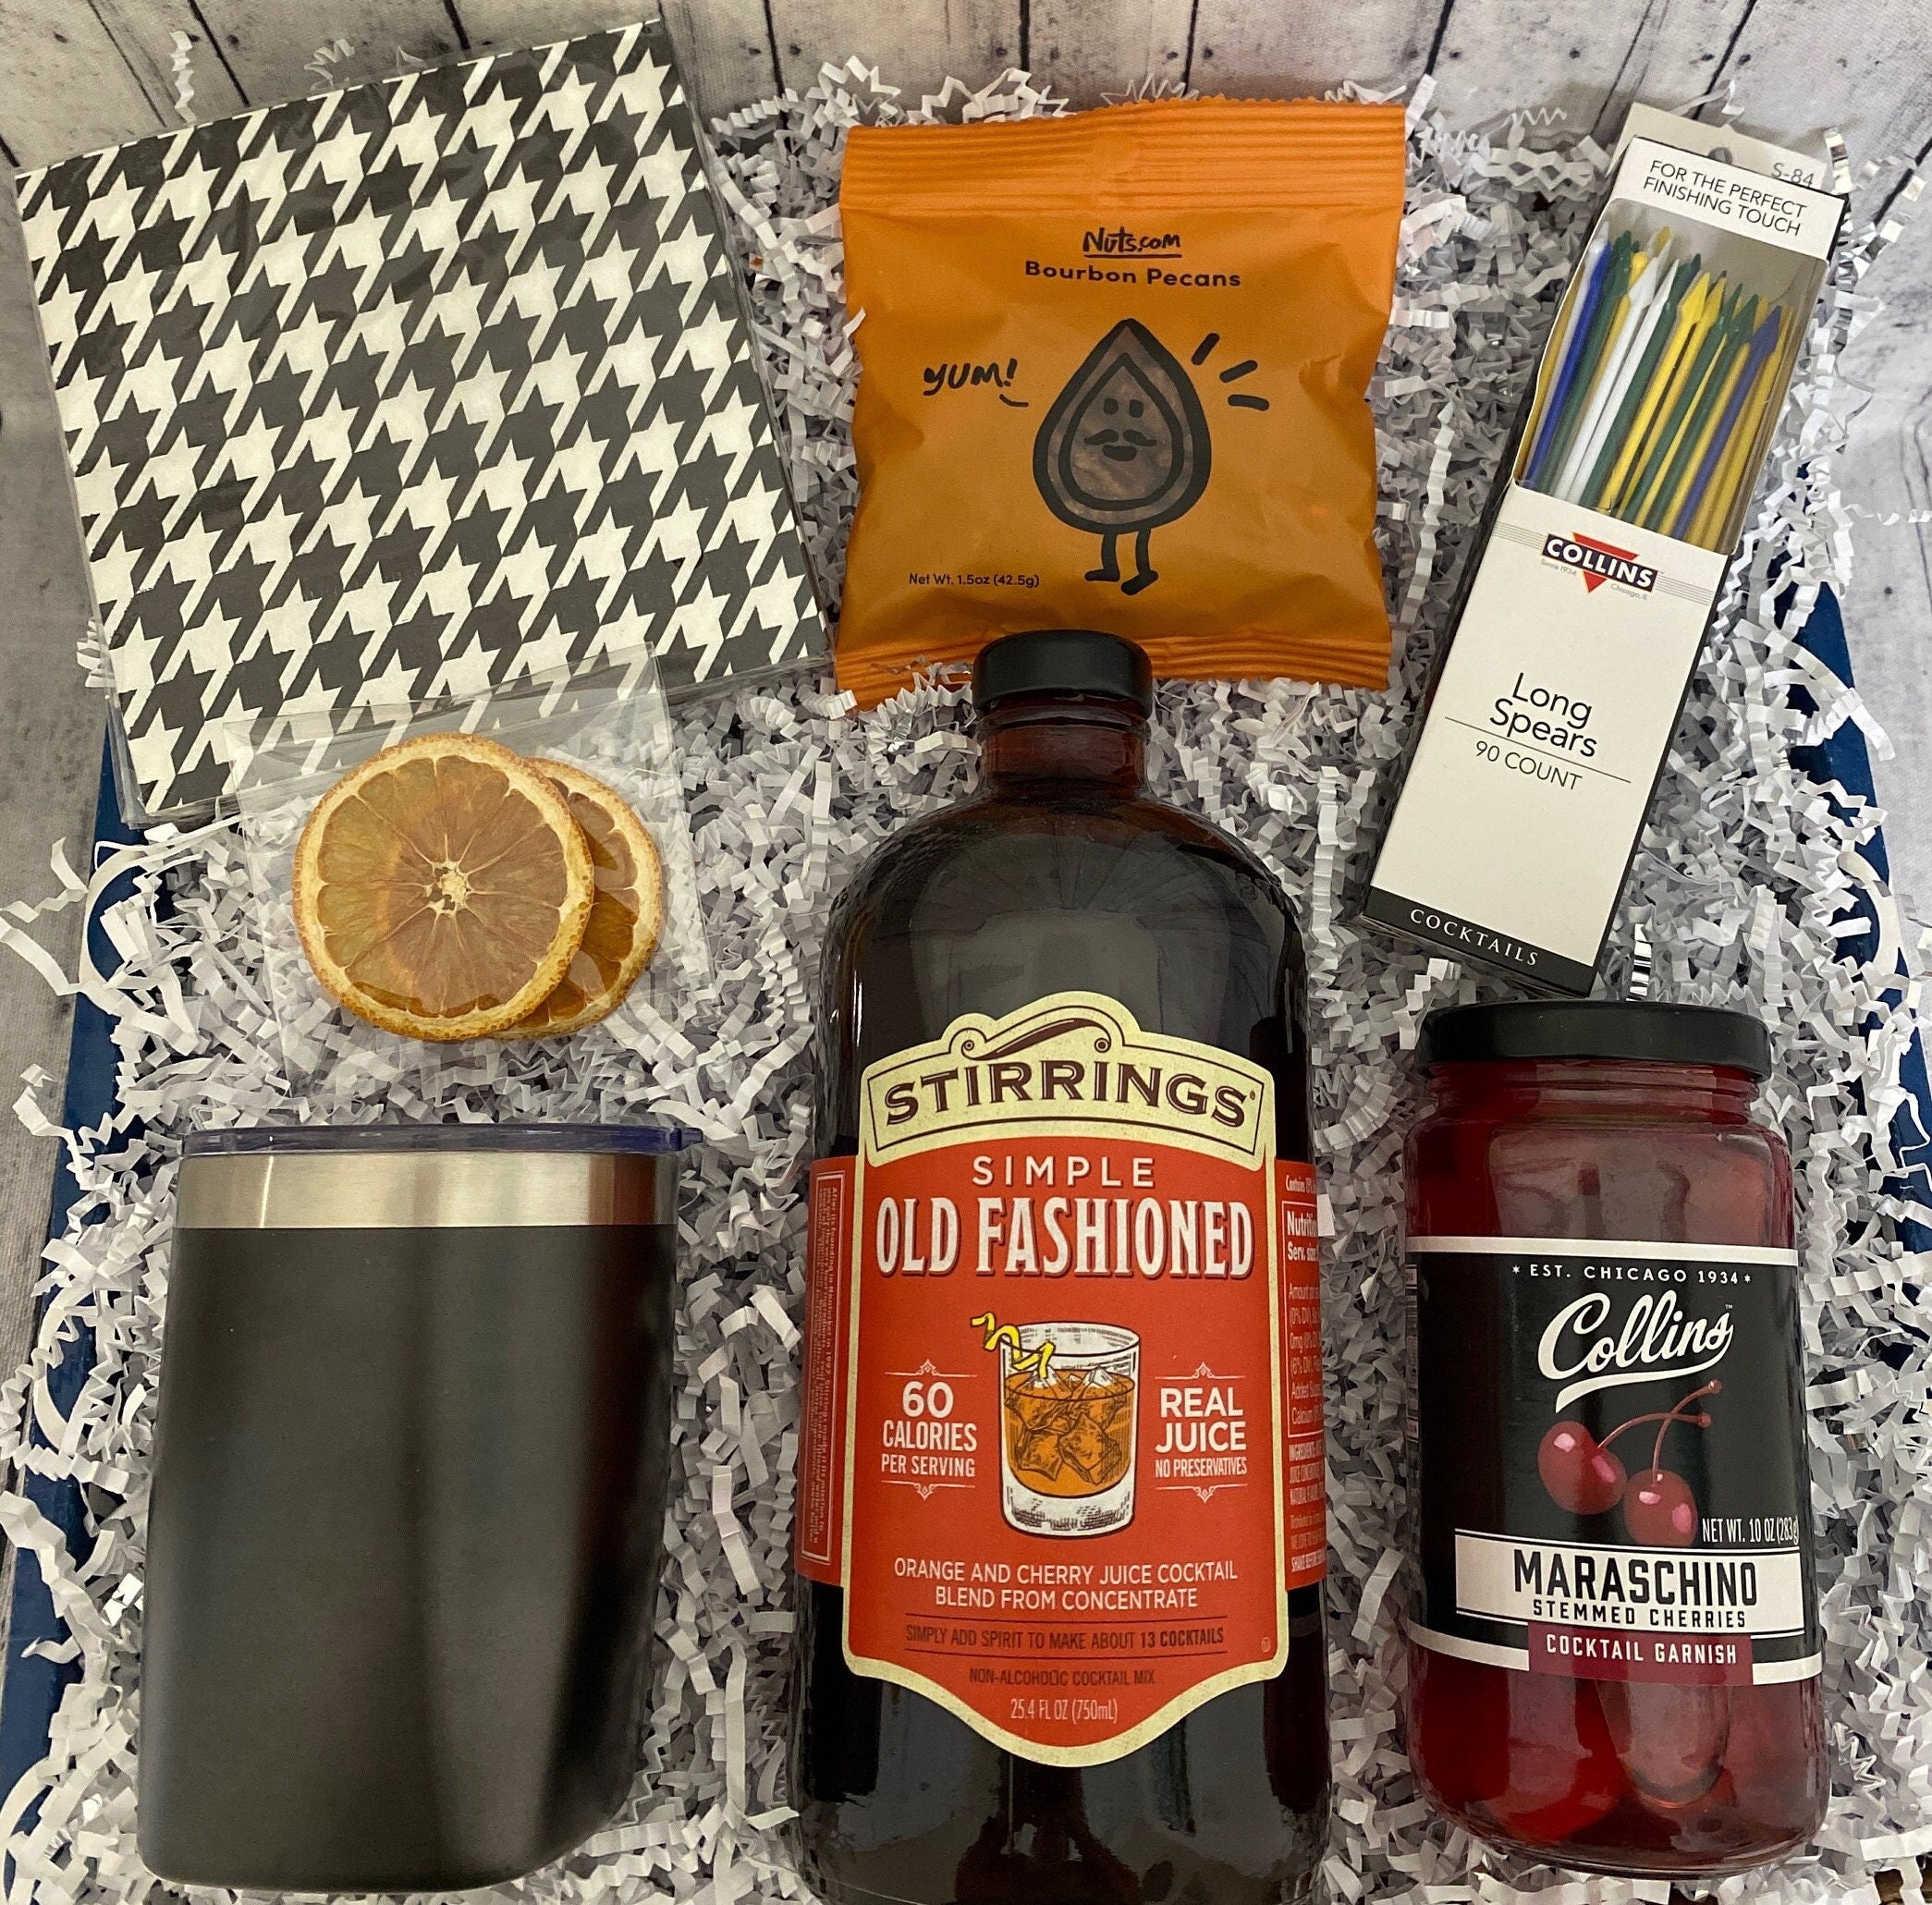 DIY Cocktail Kits and Mocktail Kits for Holiday Gifts - Mitten Girl